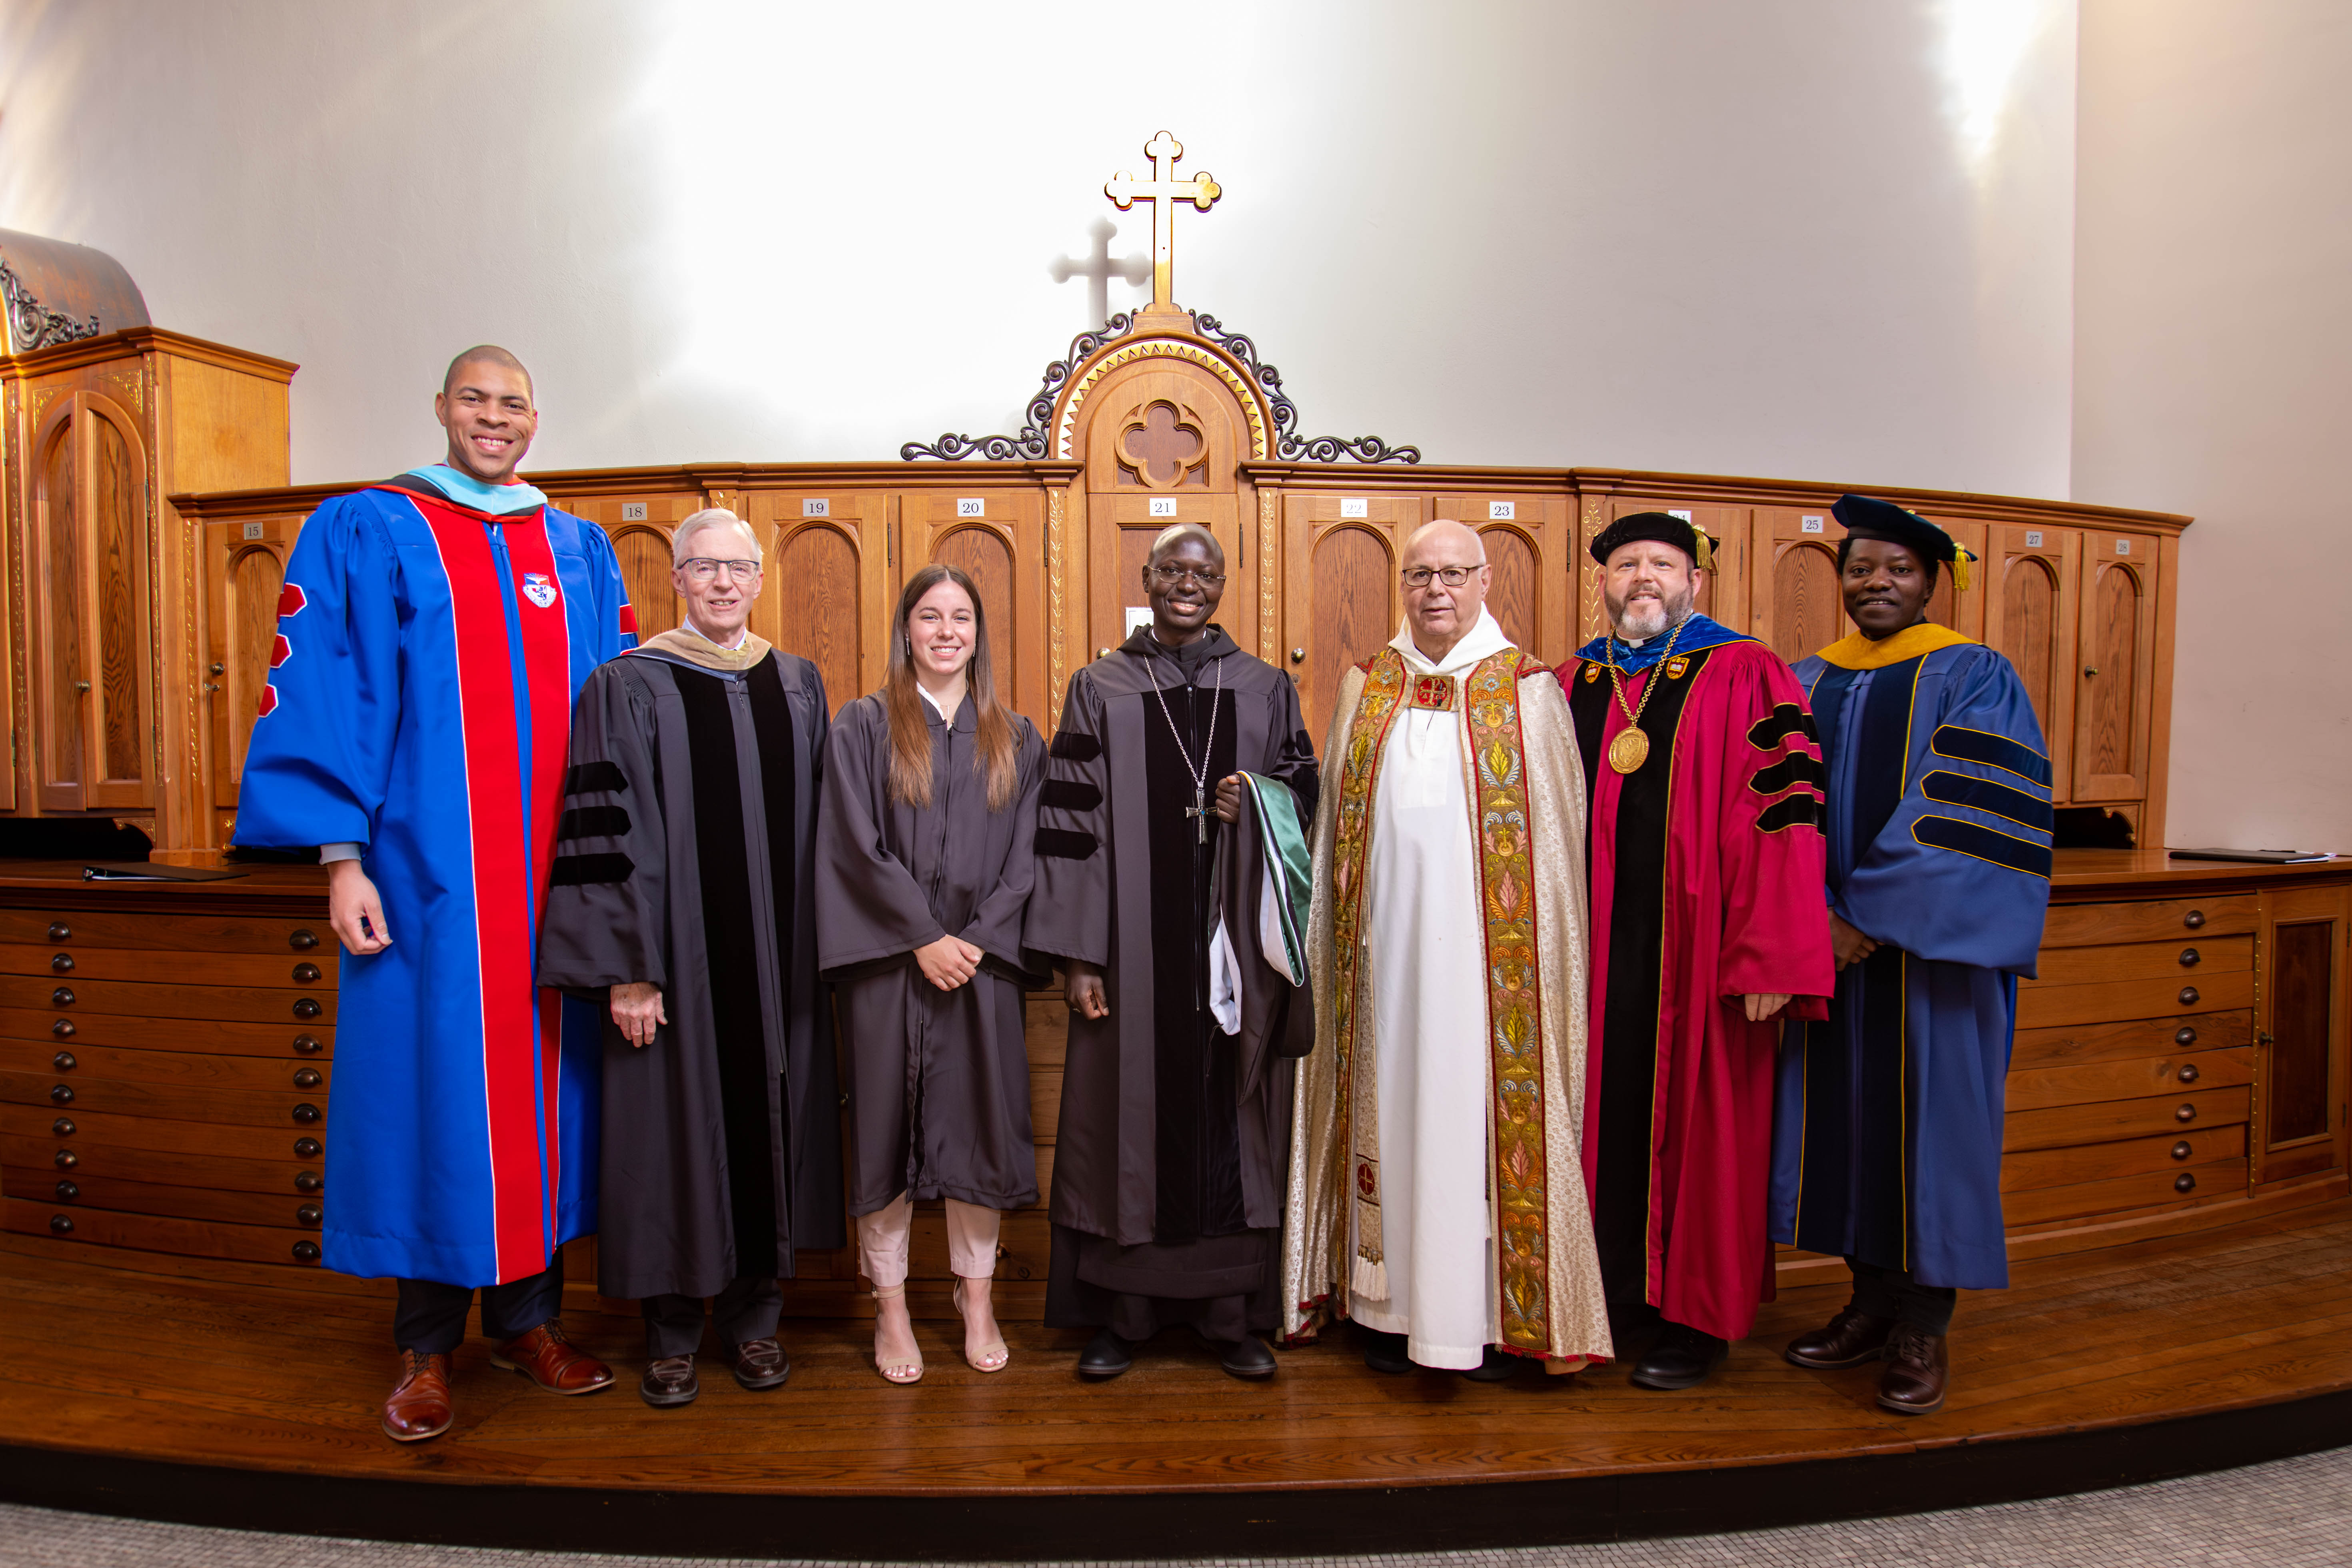 Saint Vincent College hosts annual Founders’ Day celebration